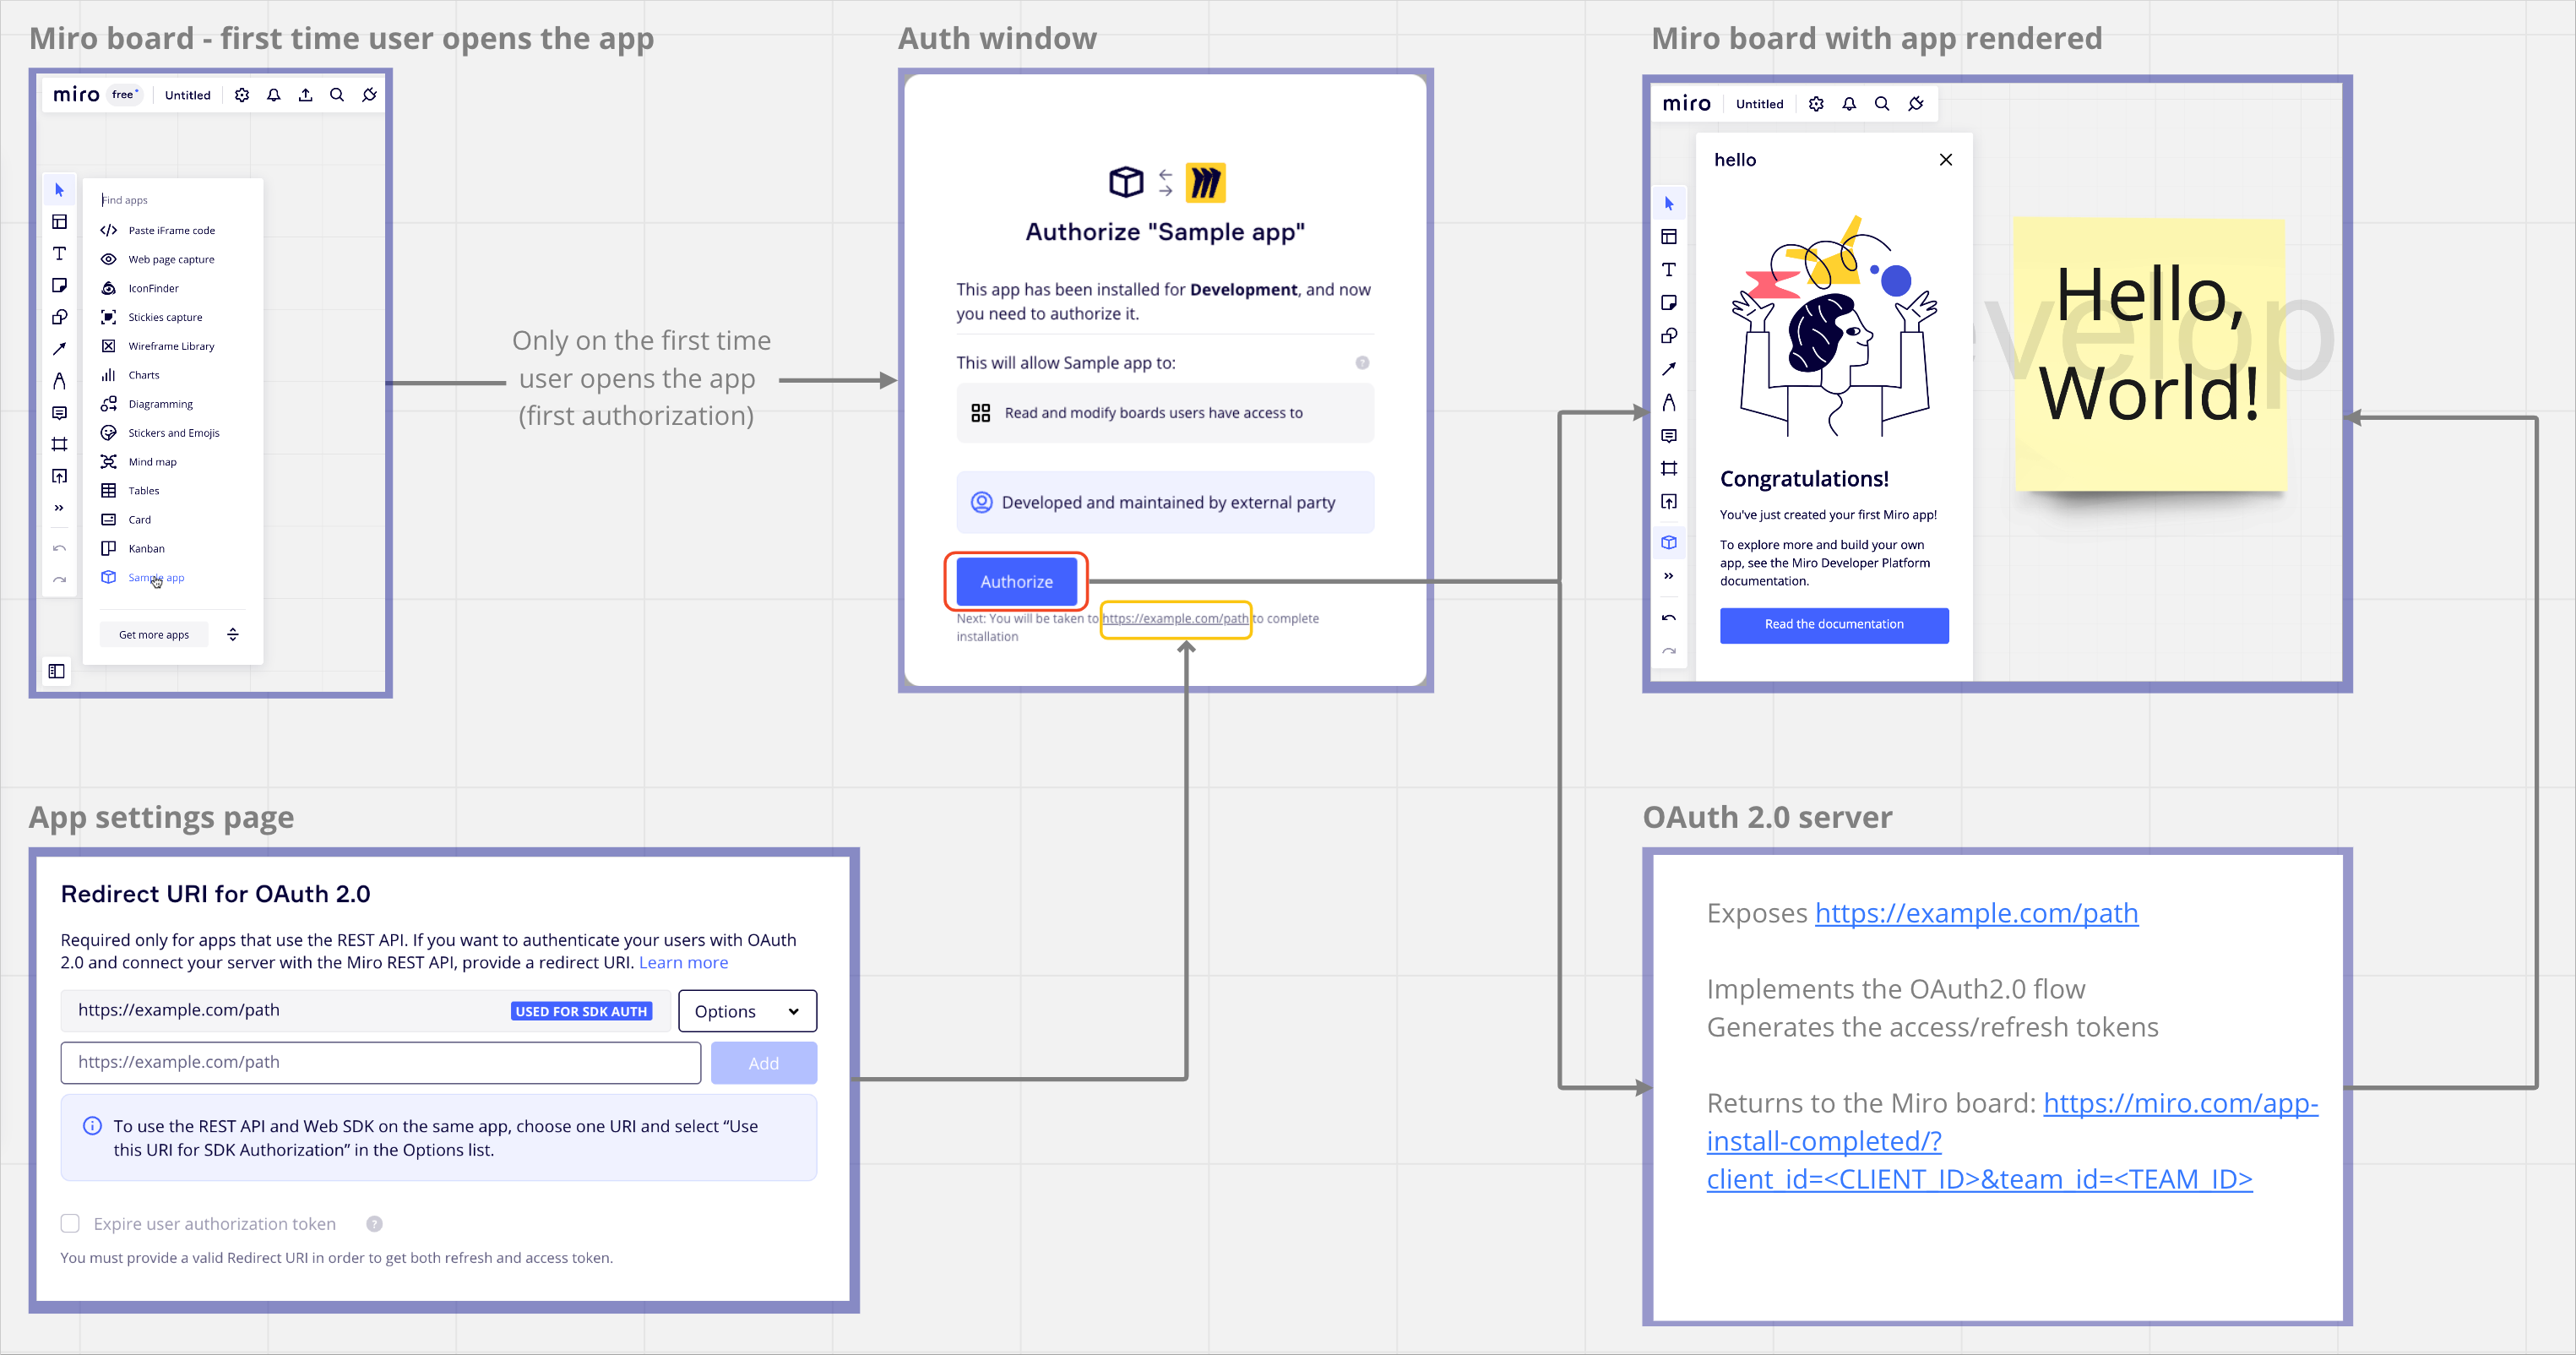 Image of OAuth 2.0 authorization code grant flow